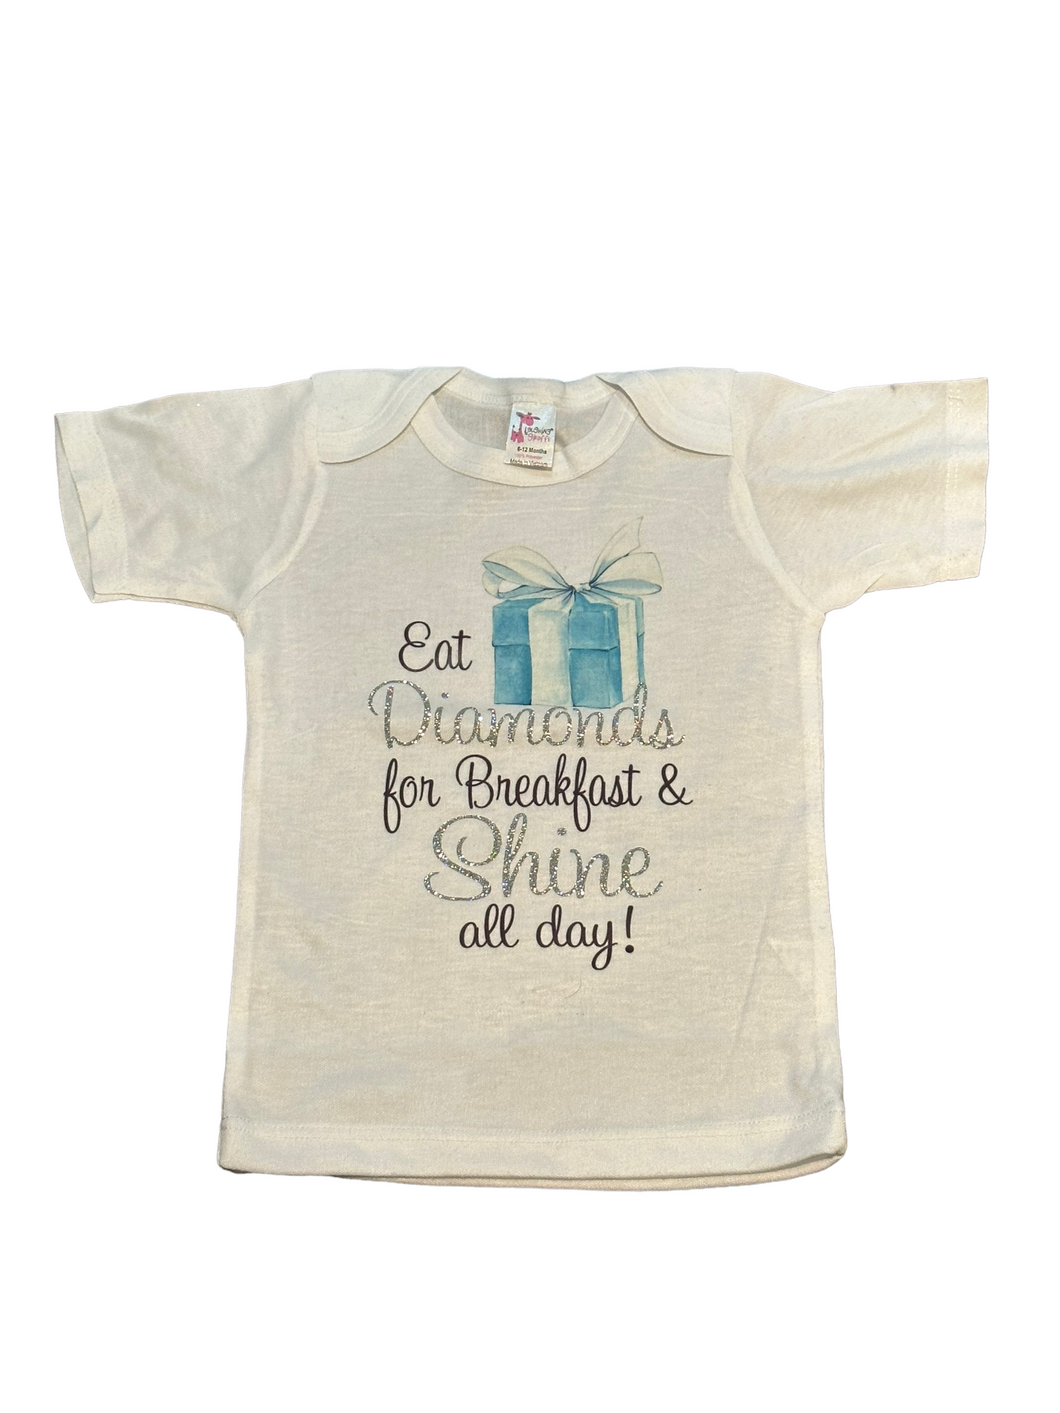 CLEARANCE Eat Diamonds for Breakfast TShirt - Size 6/12 Months